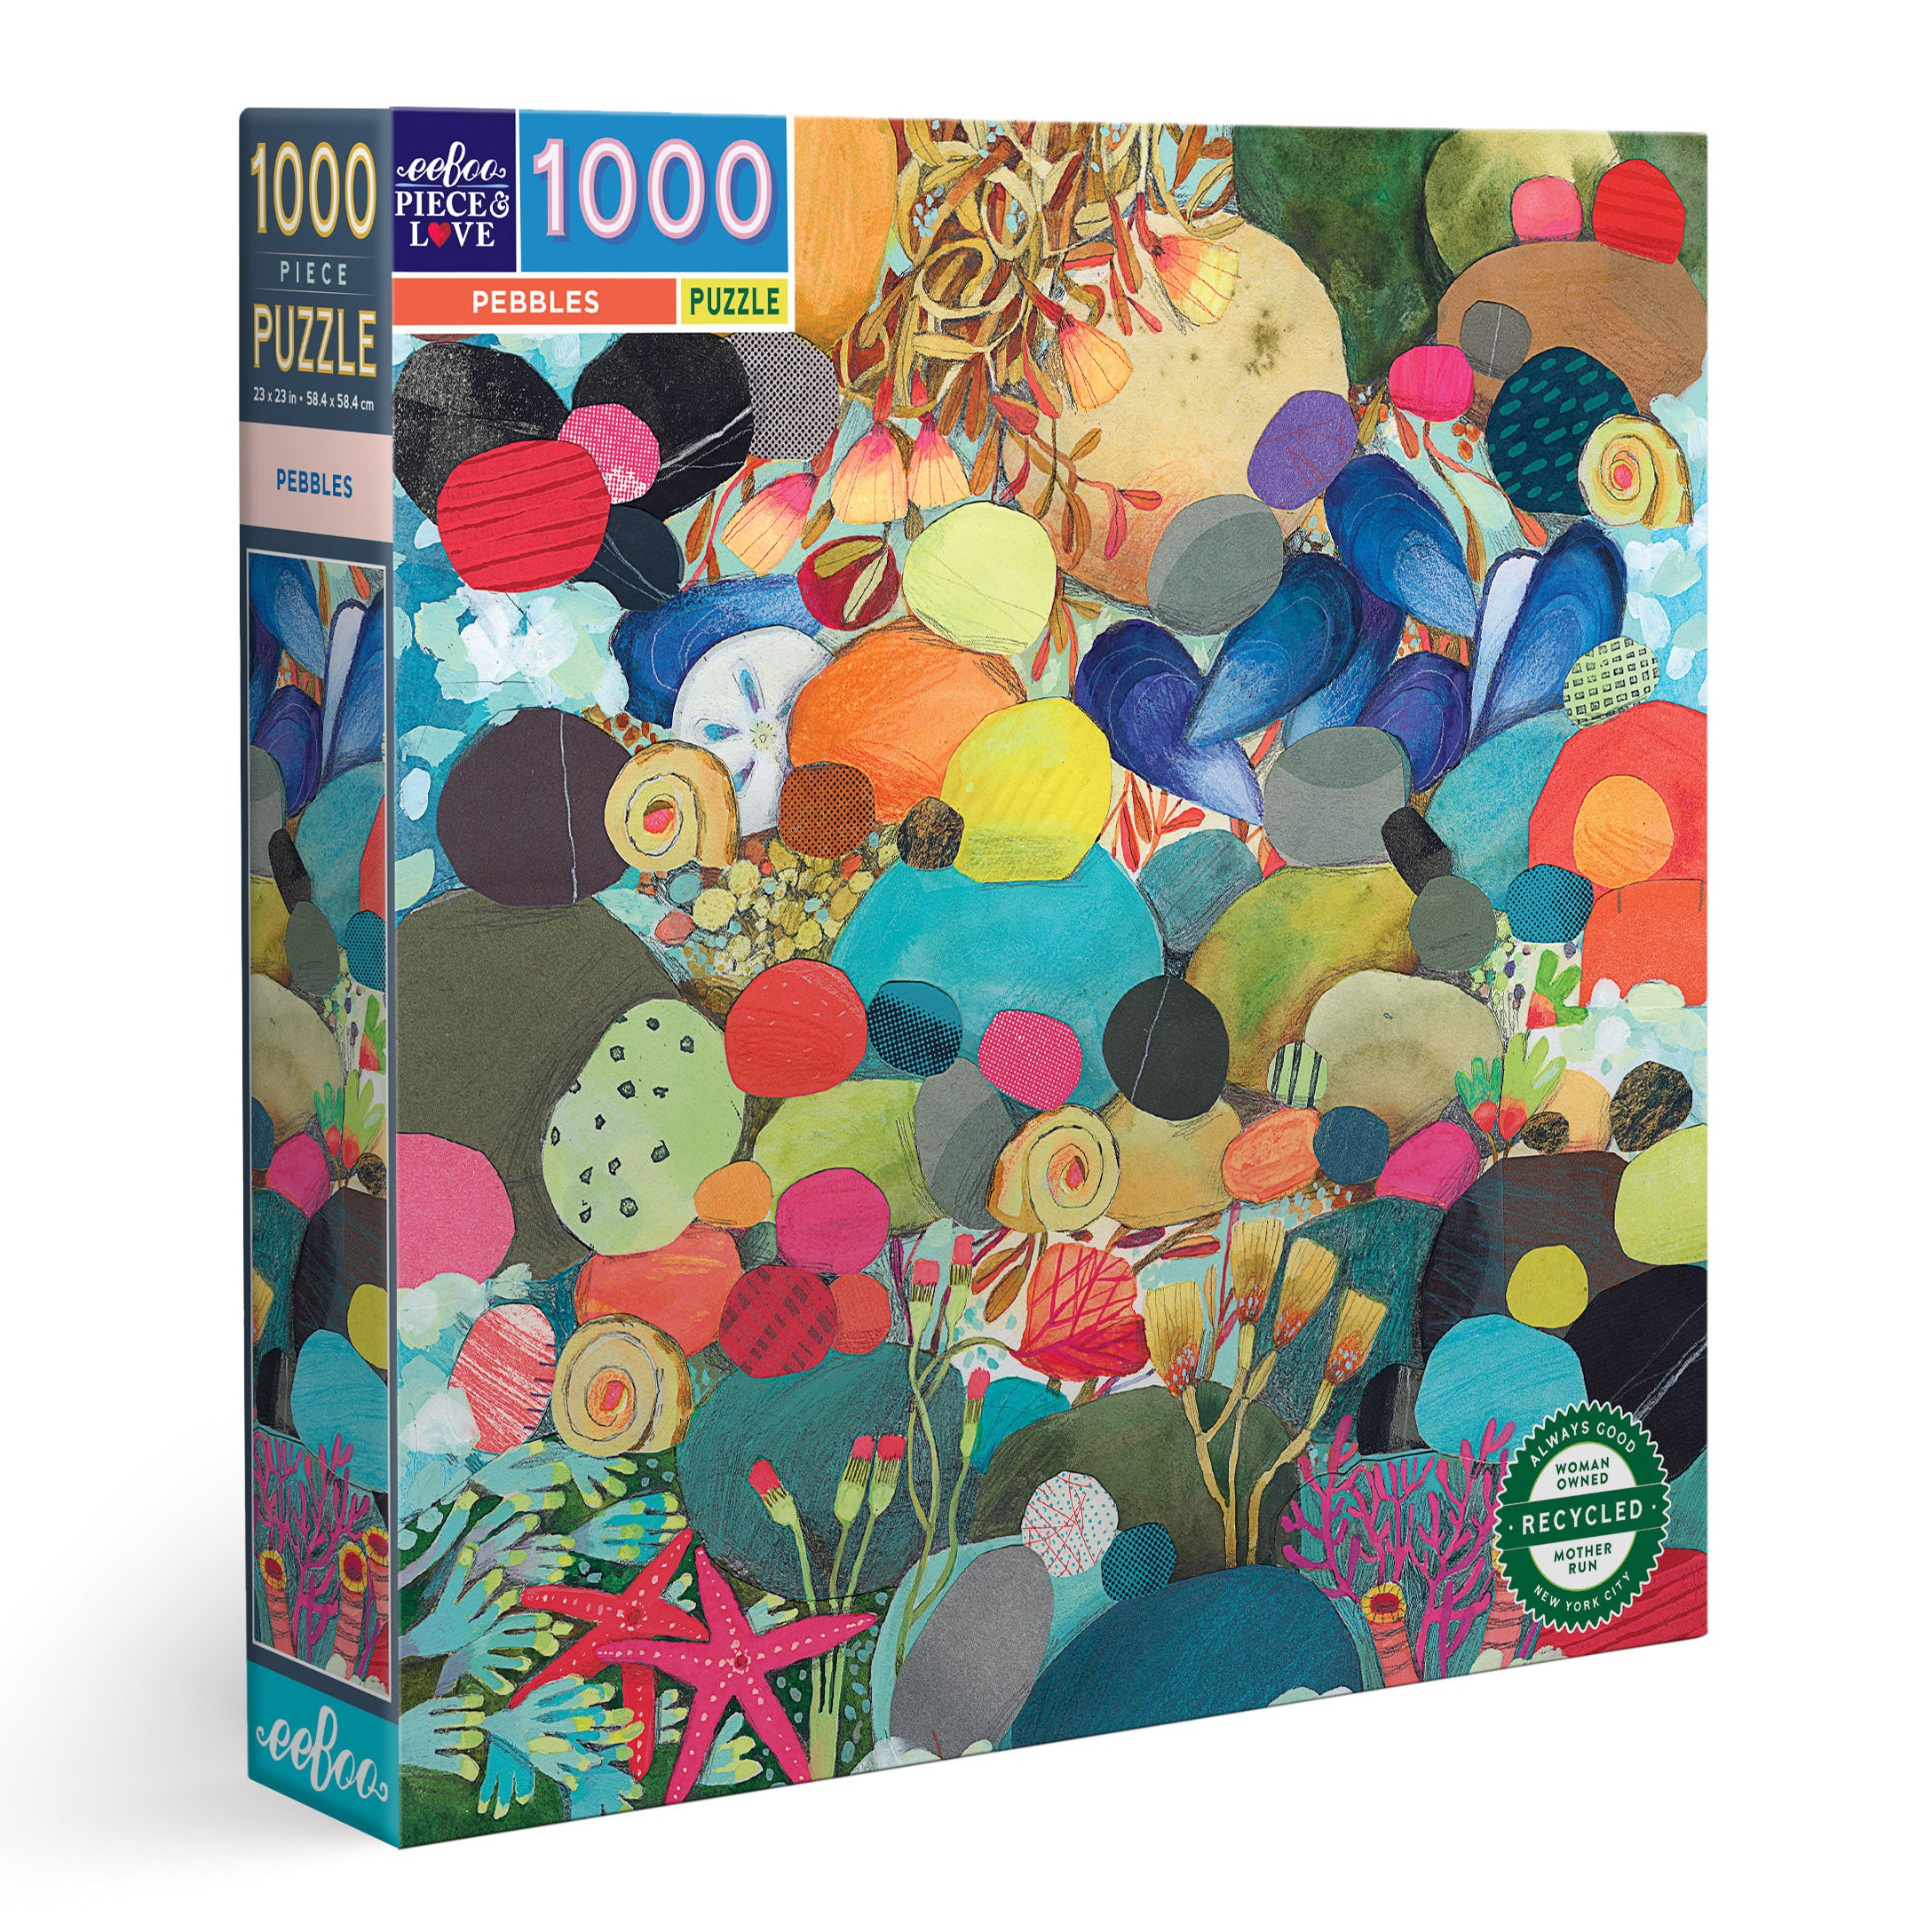 Pebbles 1000 Piece Jigsaw Puzzle eeBoo Piece & Love Gifts for Adults